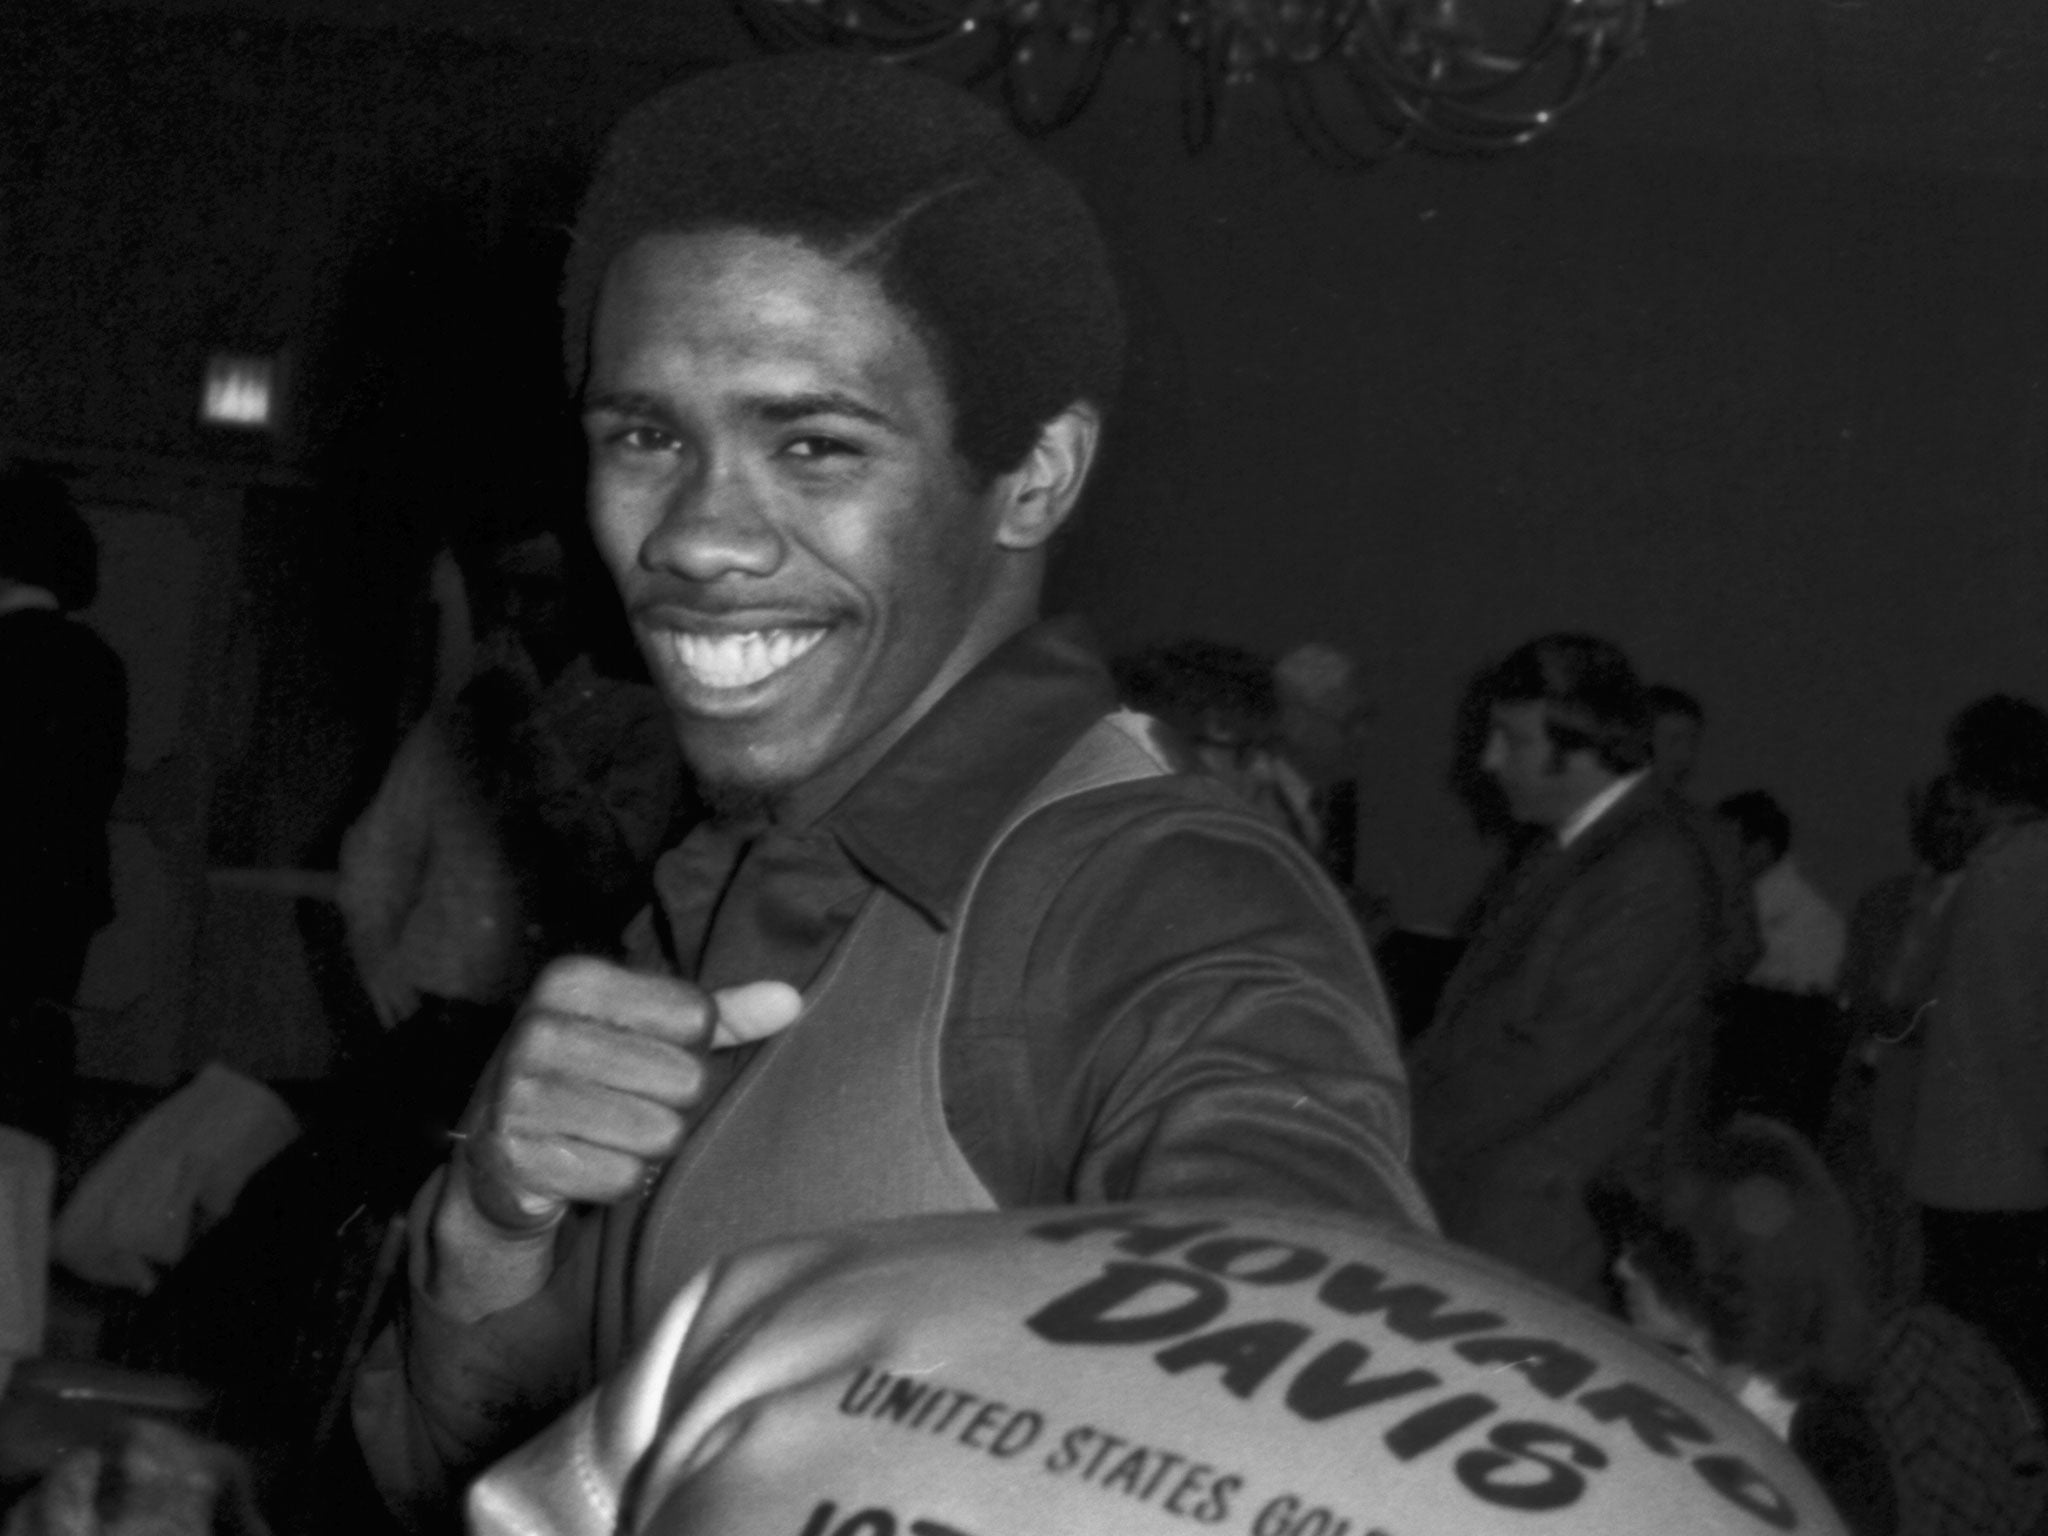 Davis at the post-Olympic press conference in 1976 at which he announced that he was turning pro